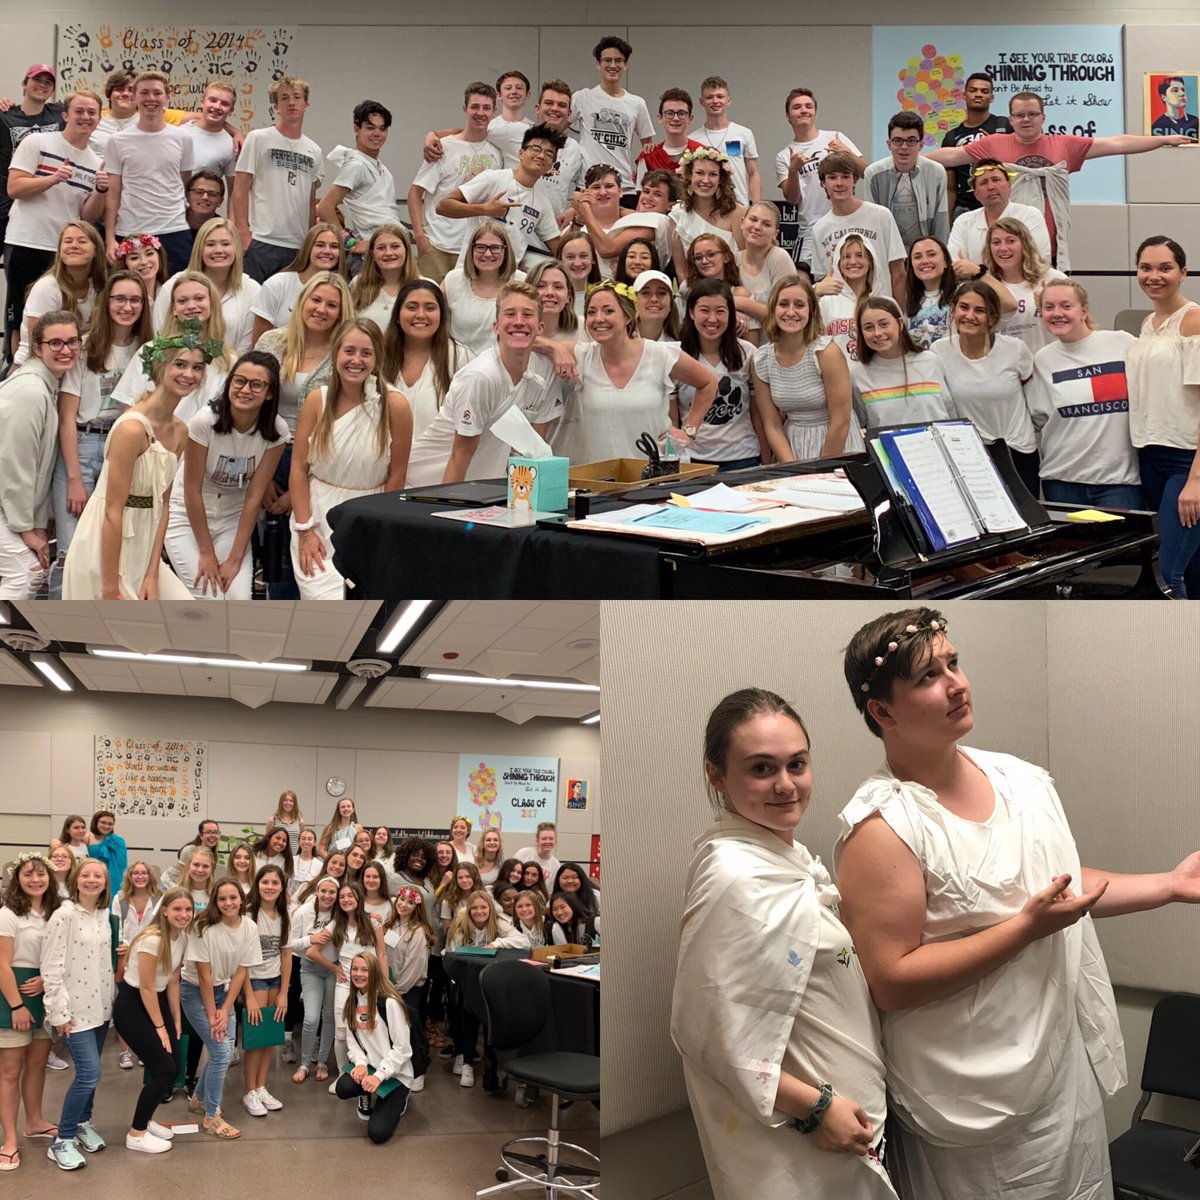 It’s TOGA TUESDAY! We’re loving all the costumes for Homecoming week! #homecoming2019 #choirculture #invest #trust #inspire #grow #toga